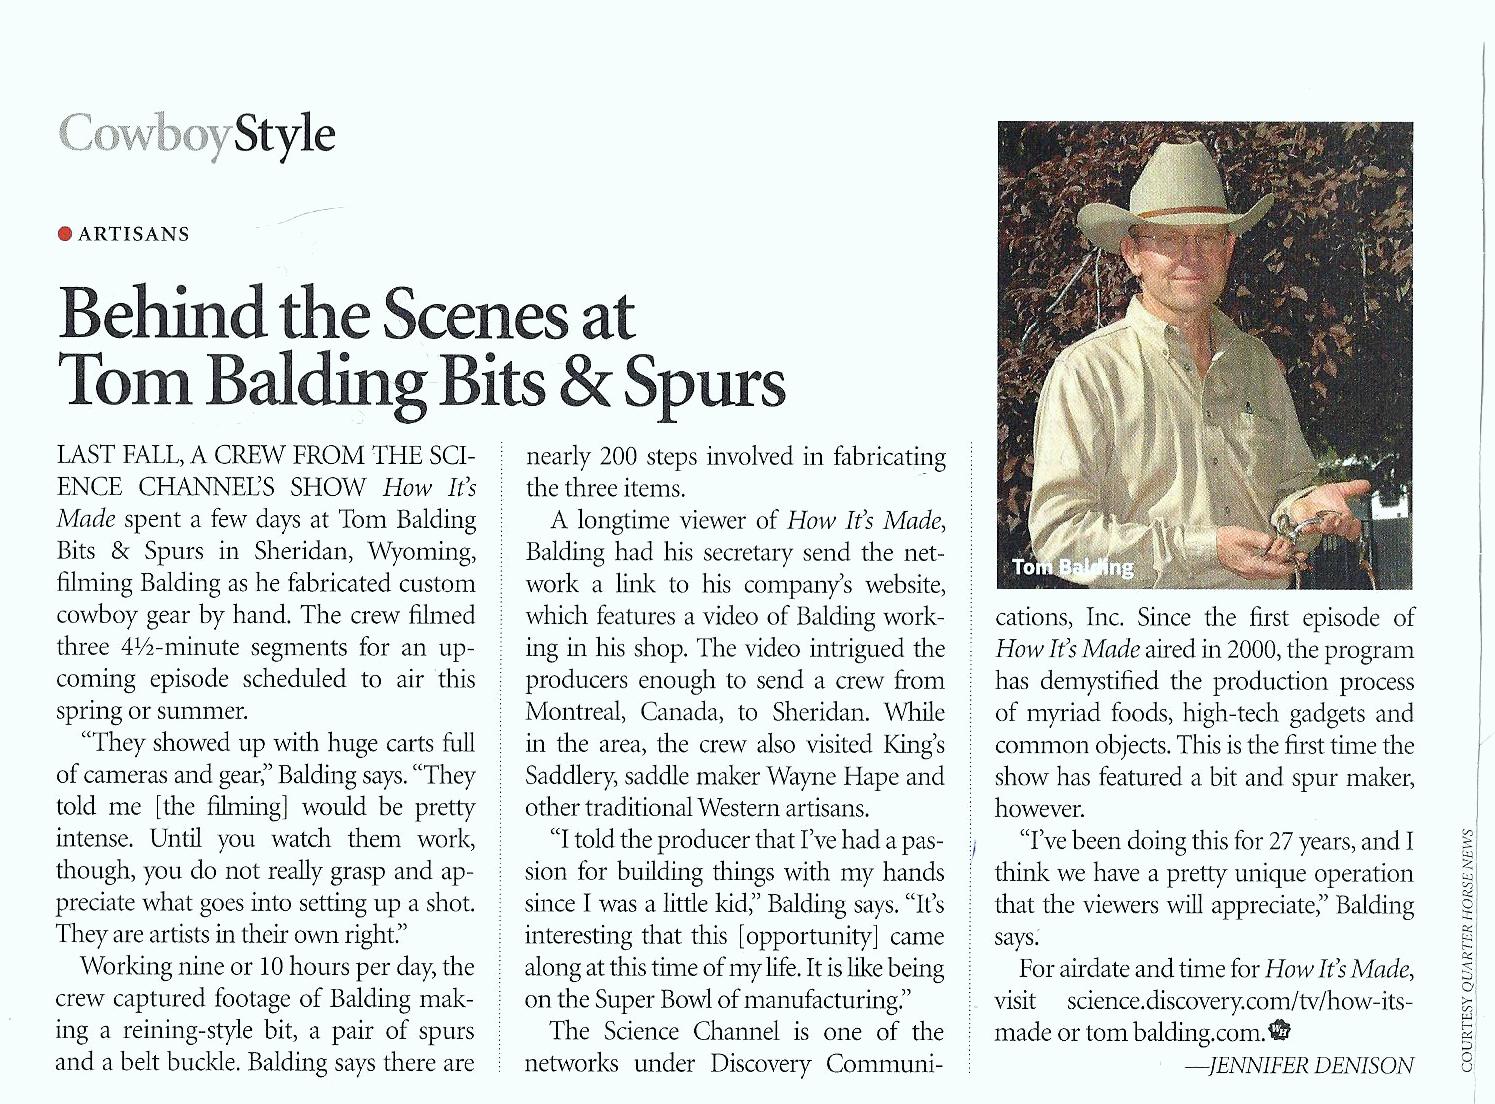 Cowboy Style Article